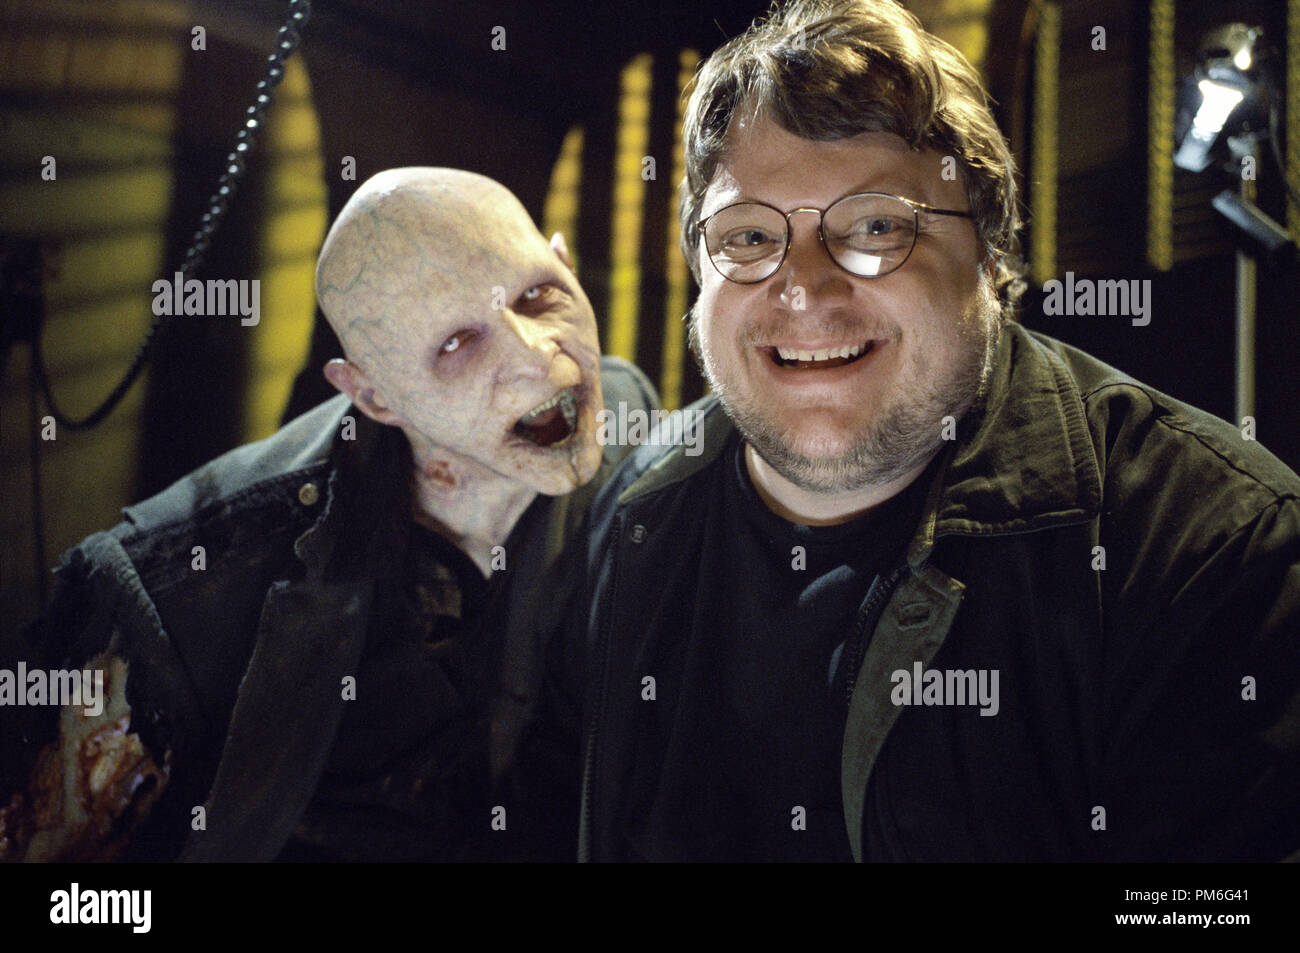 Film Still / Publicity Still from 'Blade II' Director Guillermo del Toro (rt.) with a Reaper © 2002 New Line Cinema Photo Credit: Bruce Talamon File Reference # 307541017THA  For Editorial Use Only -  All Rights Reserved Stock Photo